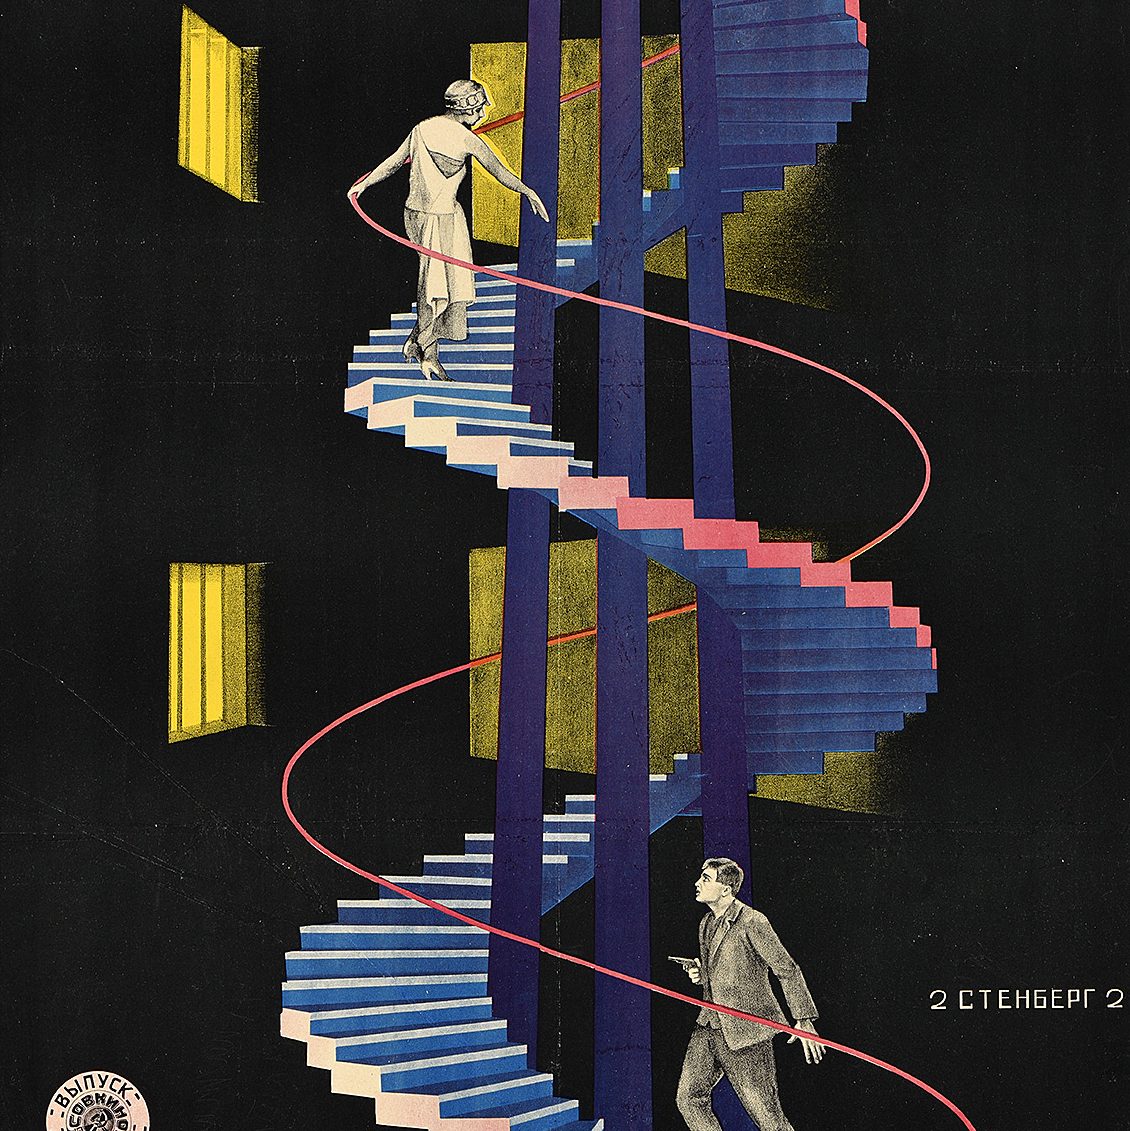 Lithographic poster of two people climbing a circular staircase, one of whom is holding a gun